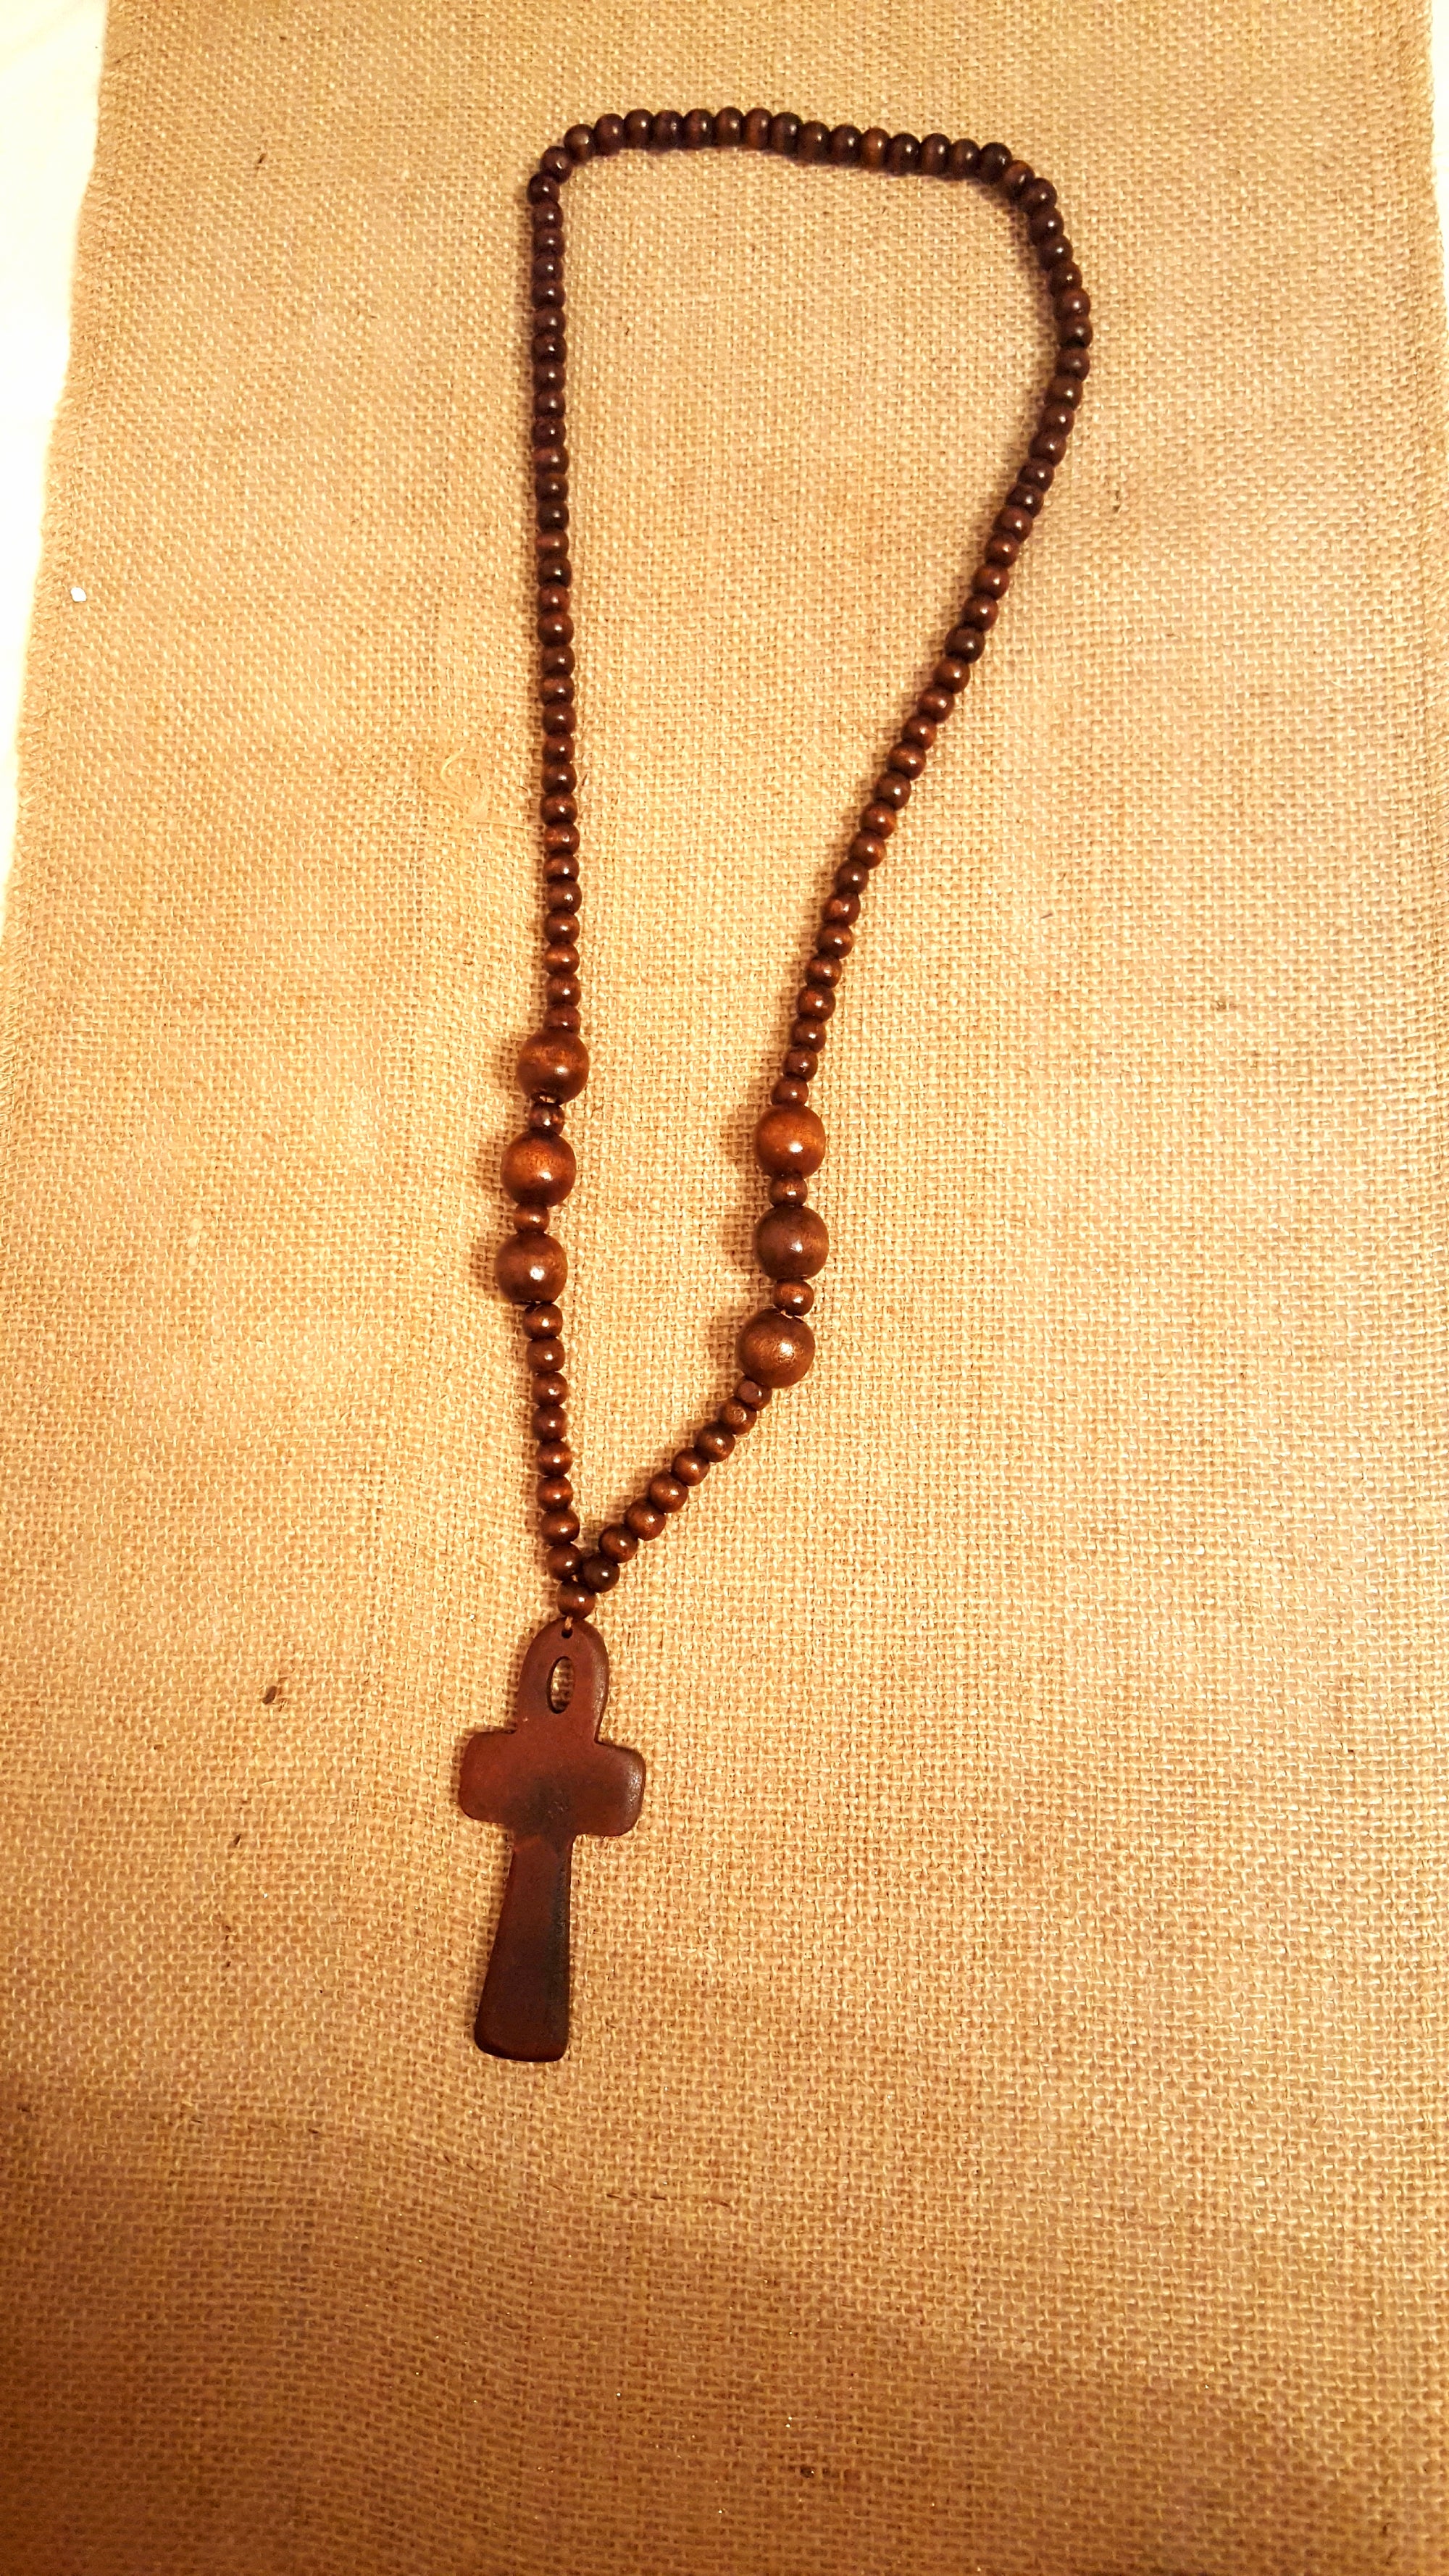 African Wooden Beads Necklace - Ankh (Symbol of Life) - Africas Closet